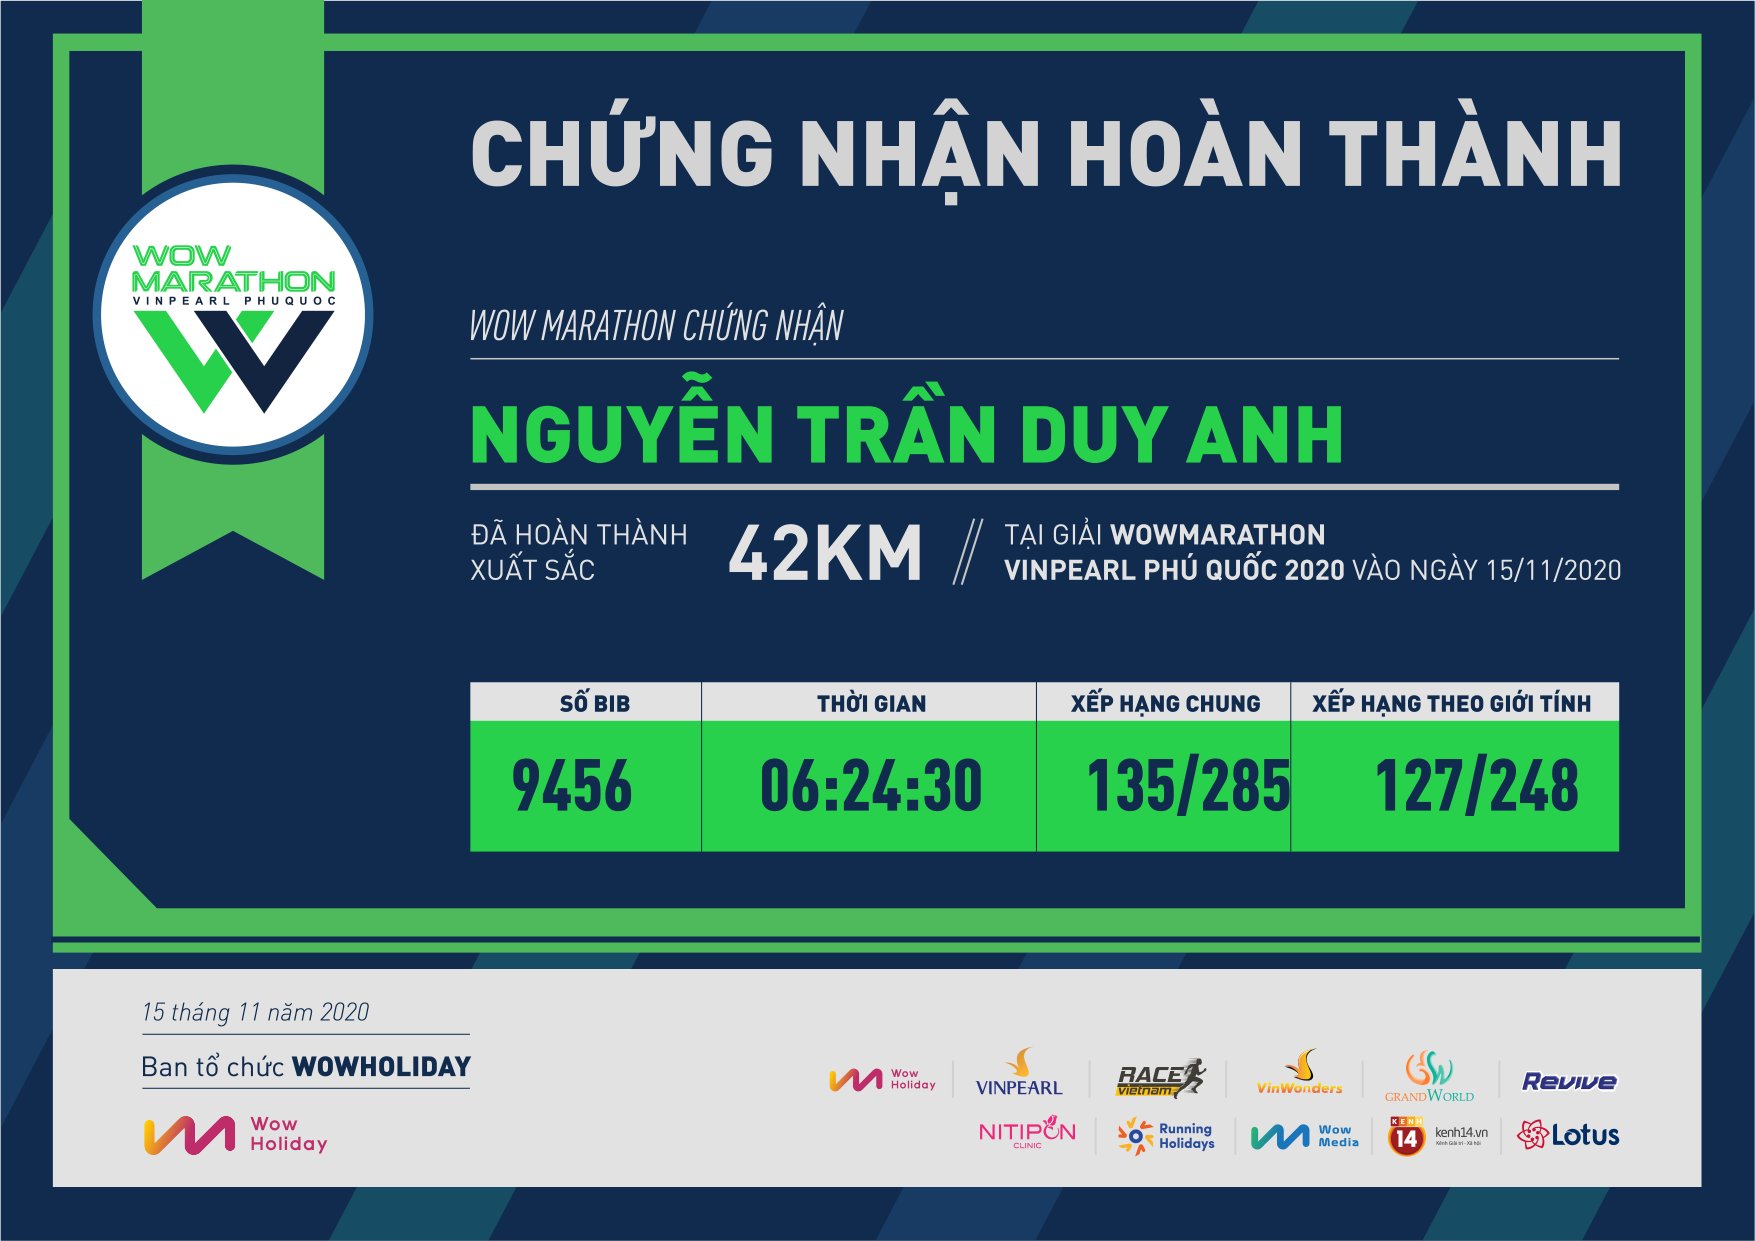 9456 - Nguyễn Trần Duy Anh